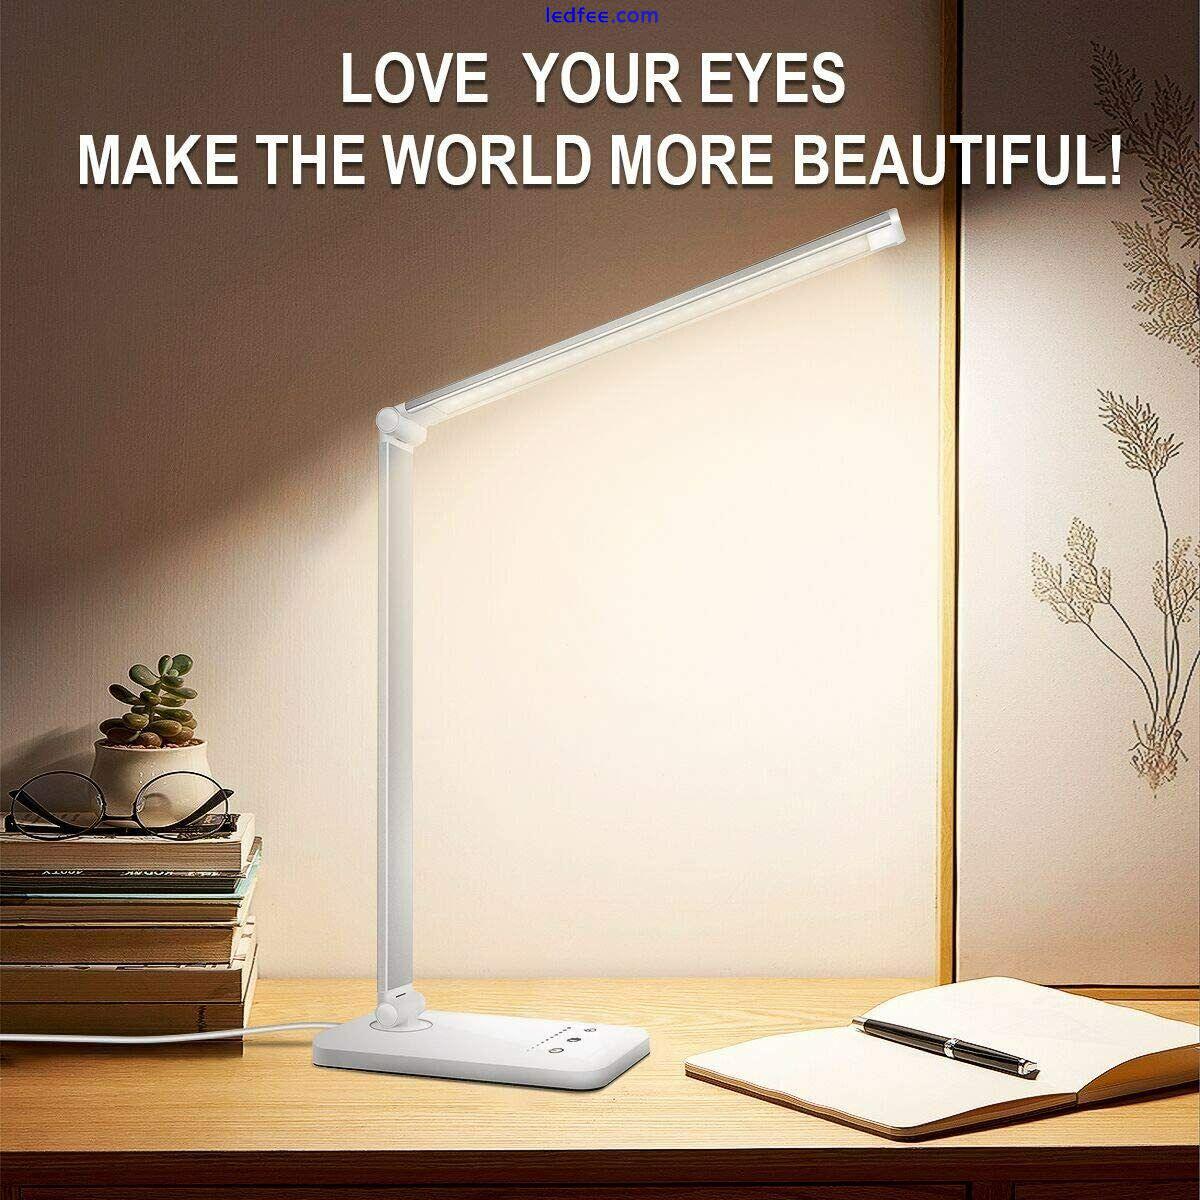 LED Desk Lamp, Eye-Caring Table Lamps, Natural Light Protects Eyes, 5 Modes 3 